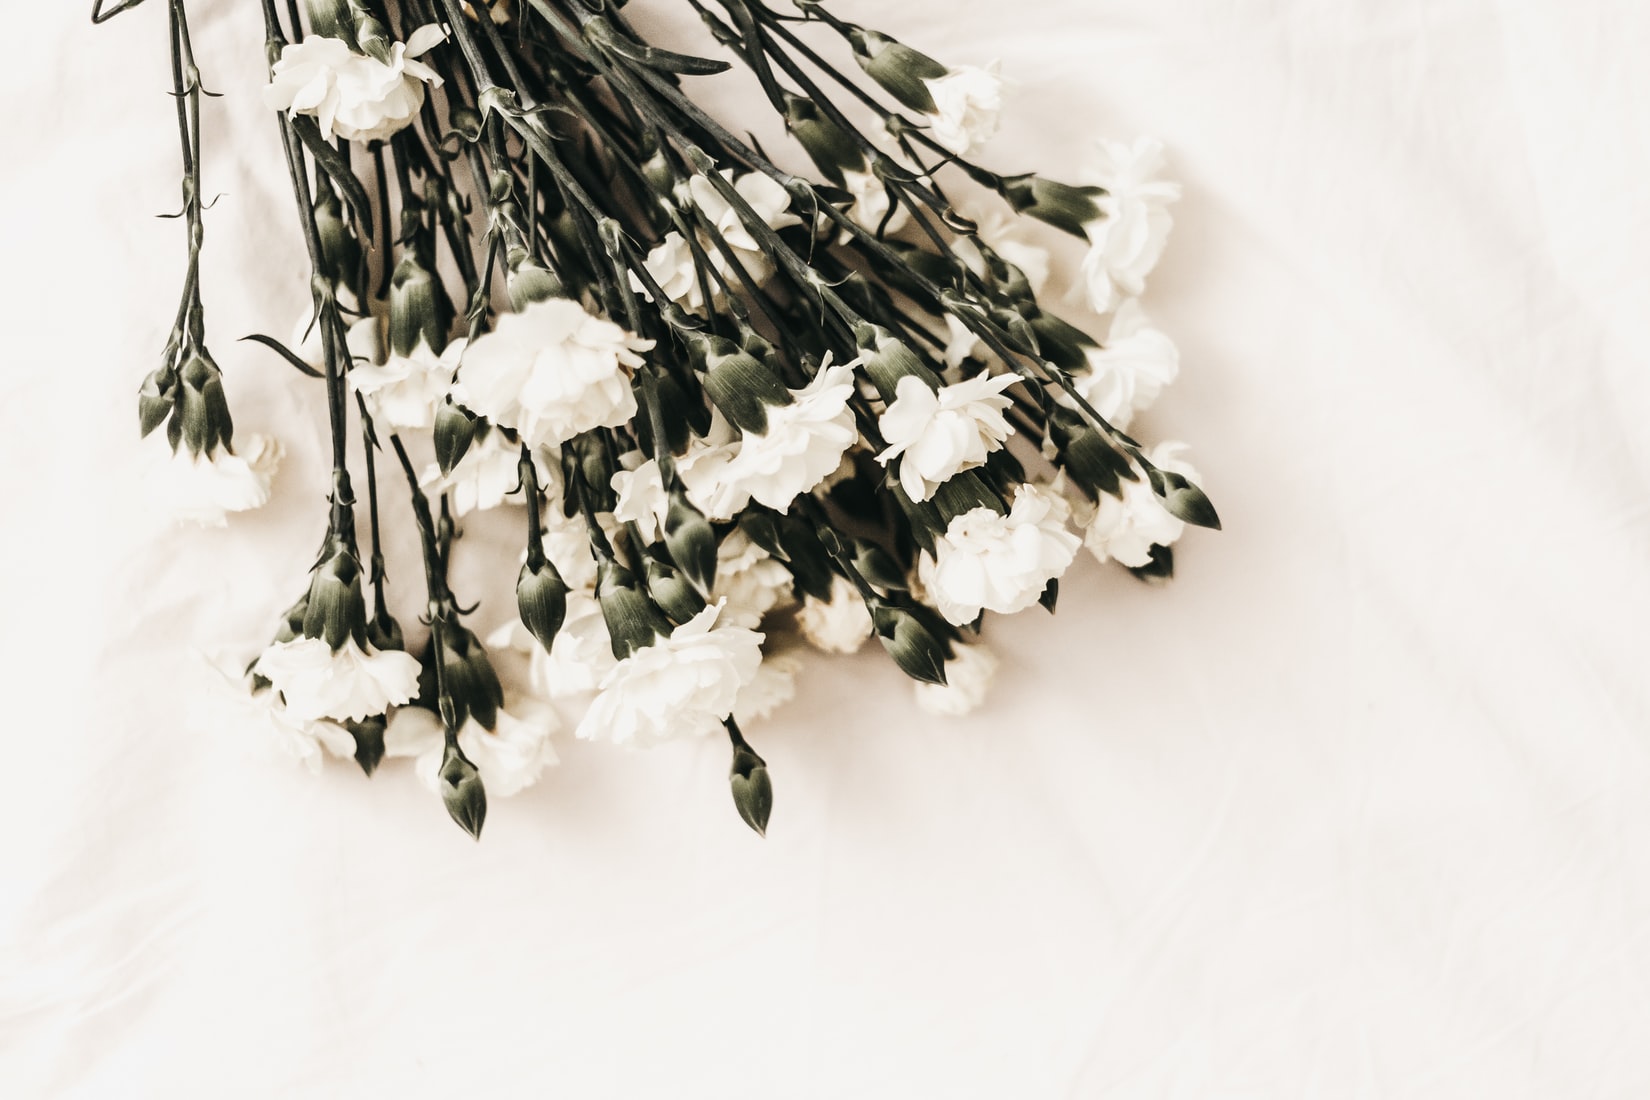 White flowers on a white background representing the services of funeral comparison website Funeralocity